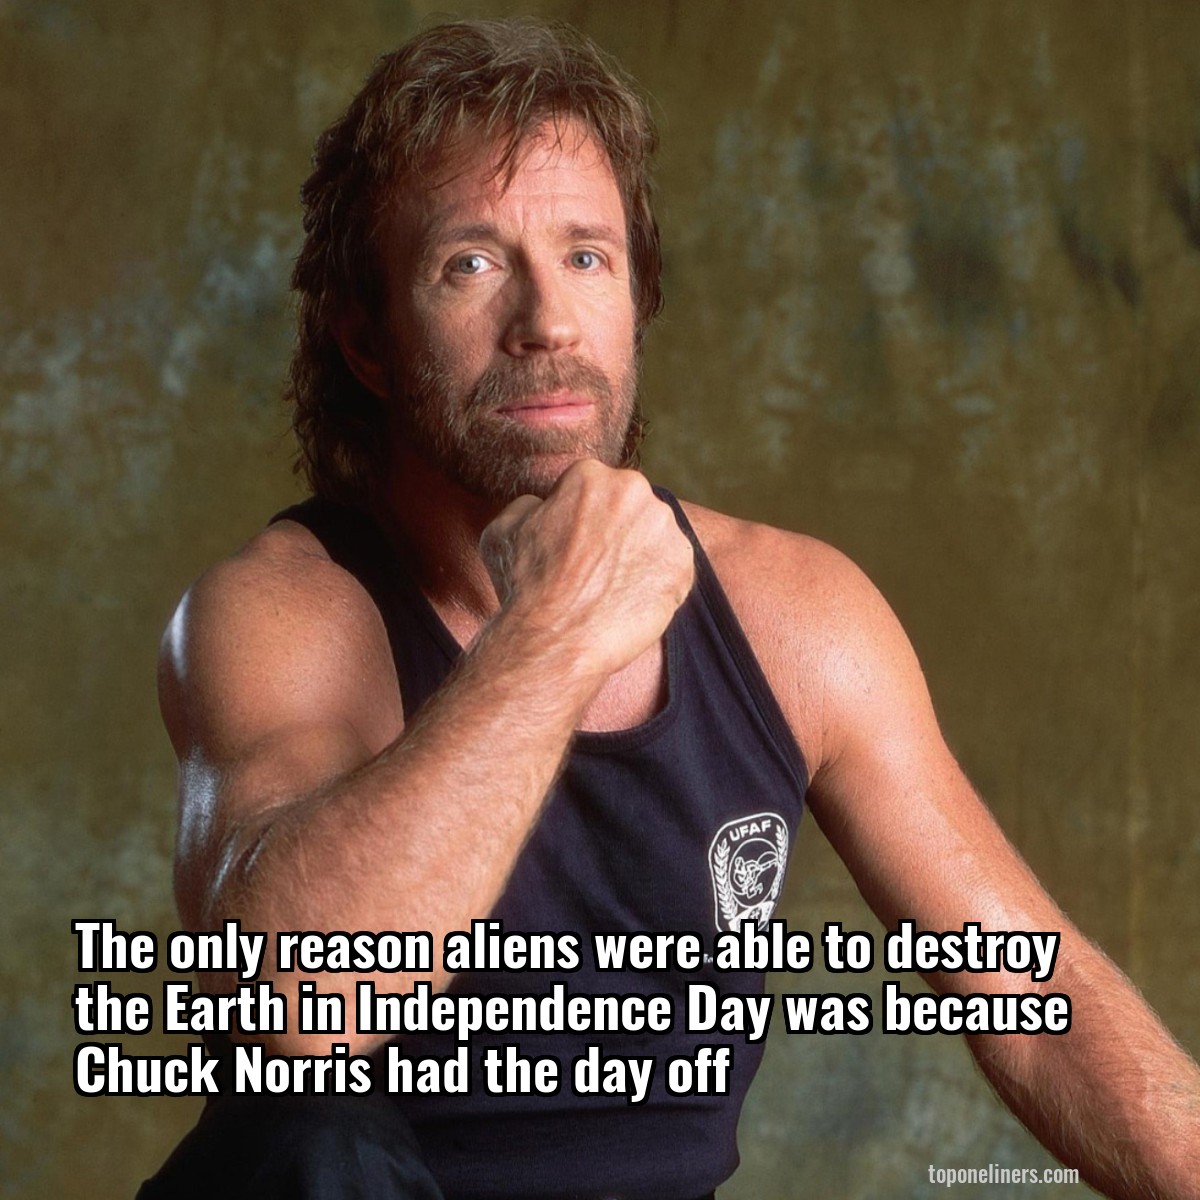 The only reason aliens were able to destroy the Earth in Independence Day was because Chuck Norris had the day off